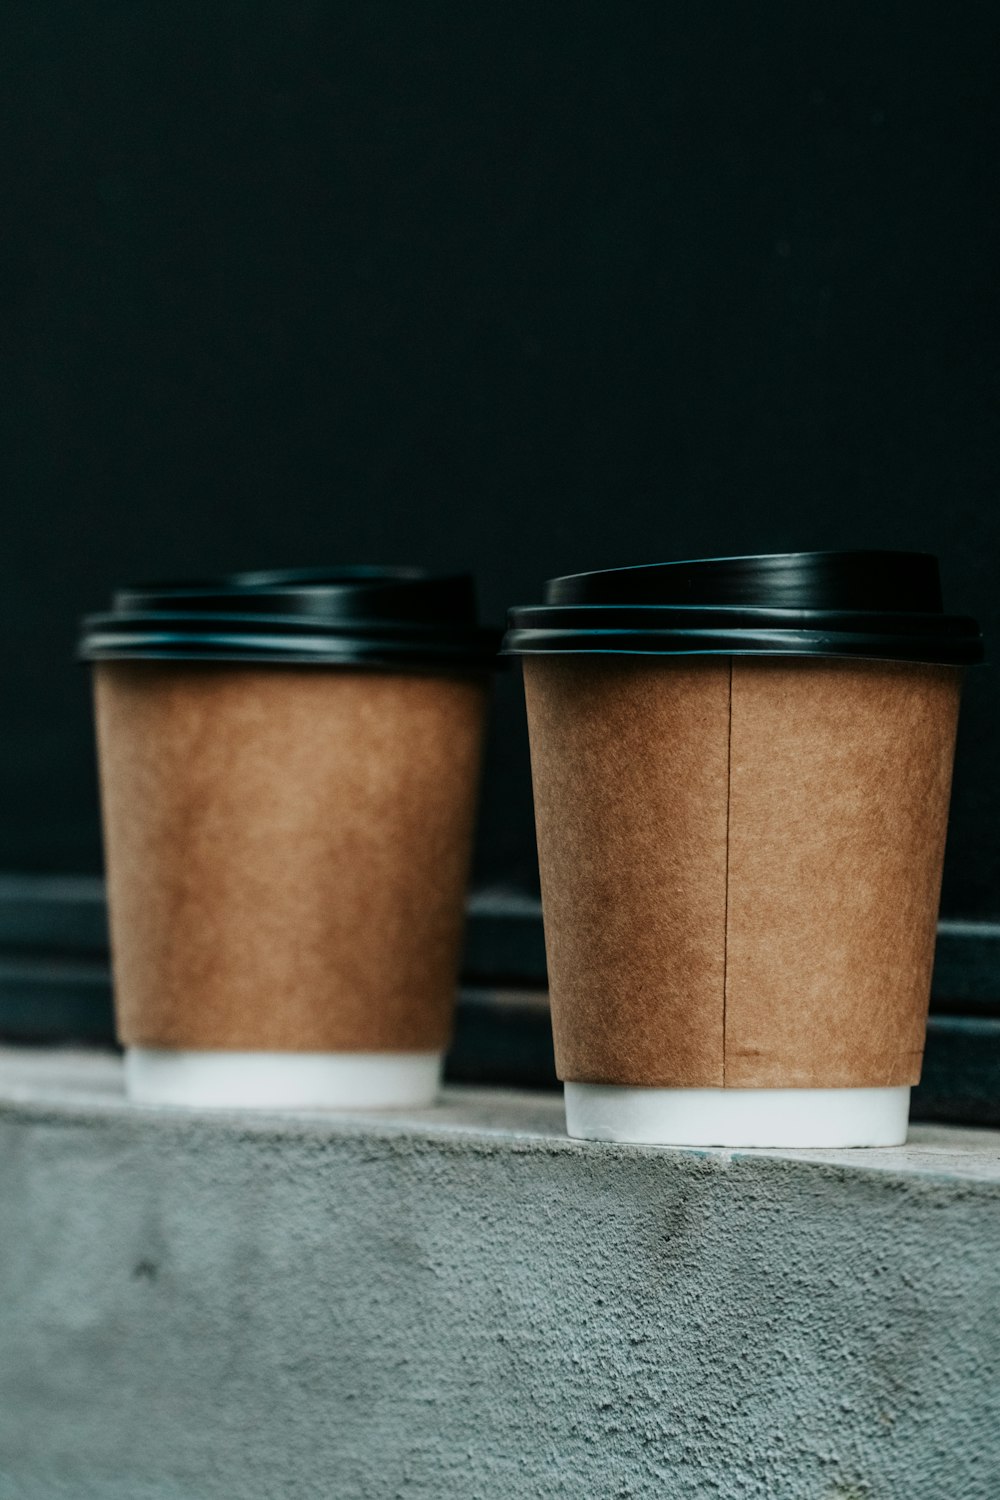 Two brown and black plastic cups photo – Free Coffee Image on Unsplash